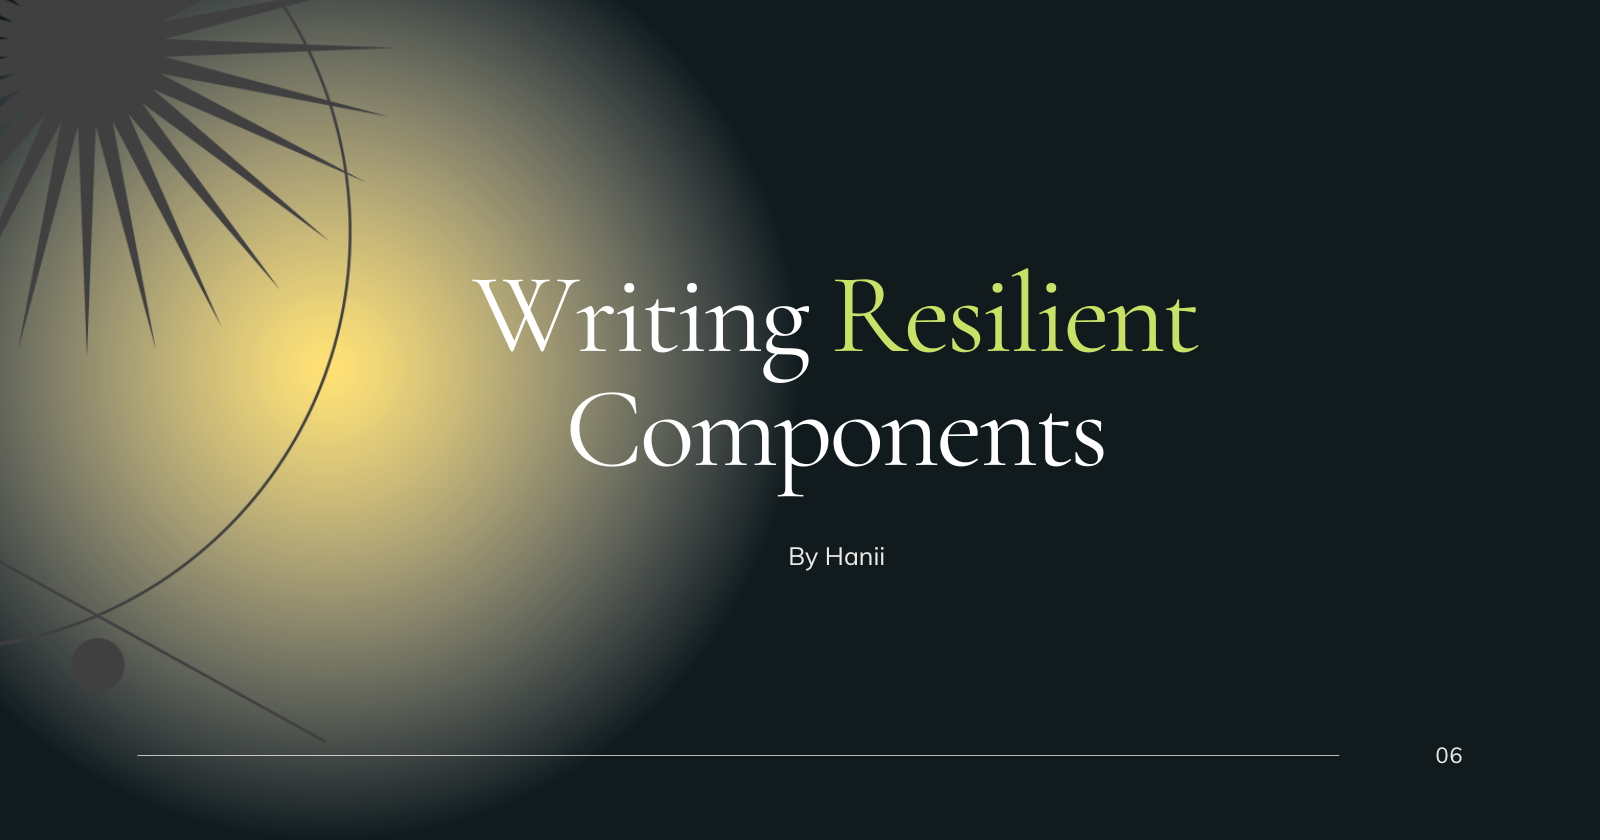 Priciples of Writing Resilient Components